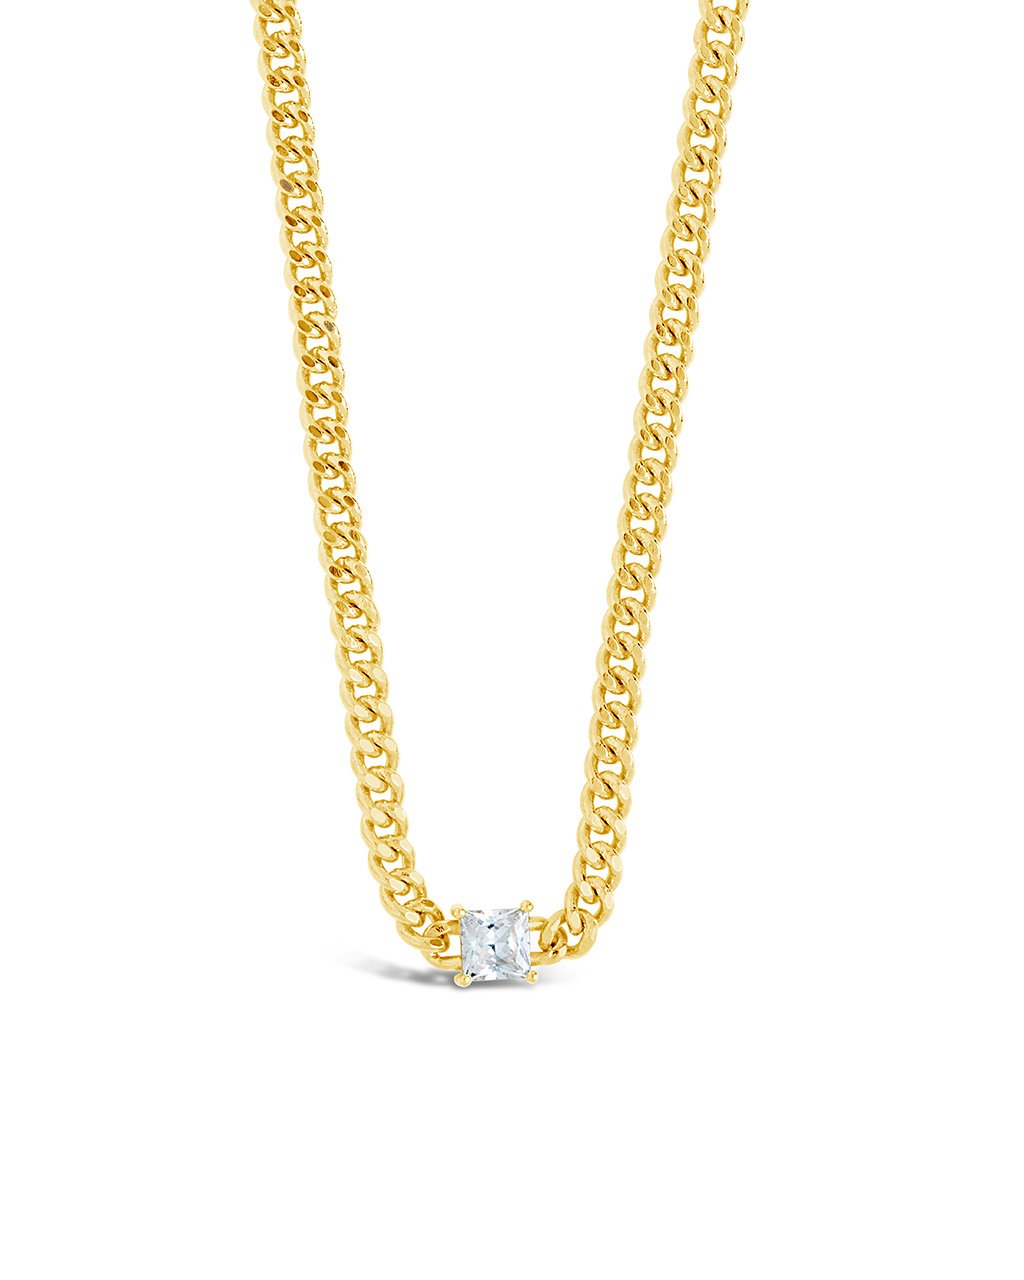 Curb Chain Necklace with Stationed CZ Necklace Sterling Forever Gold 